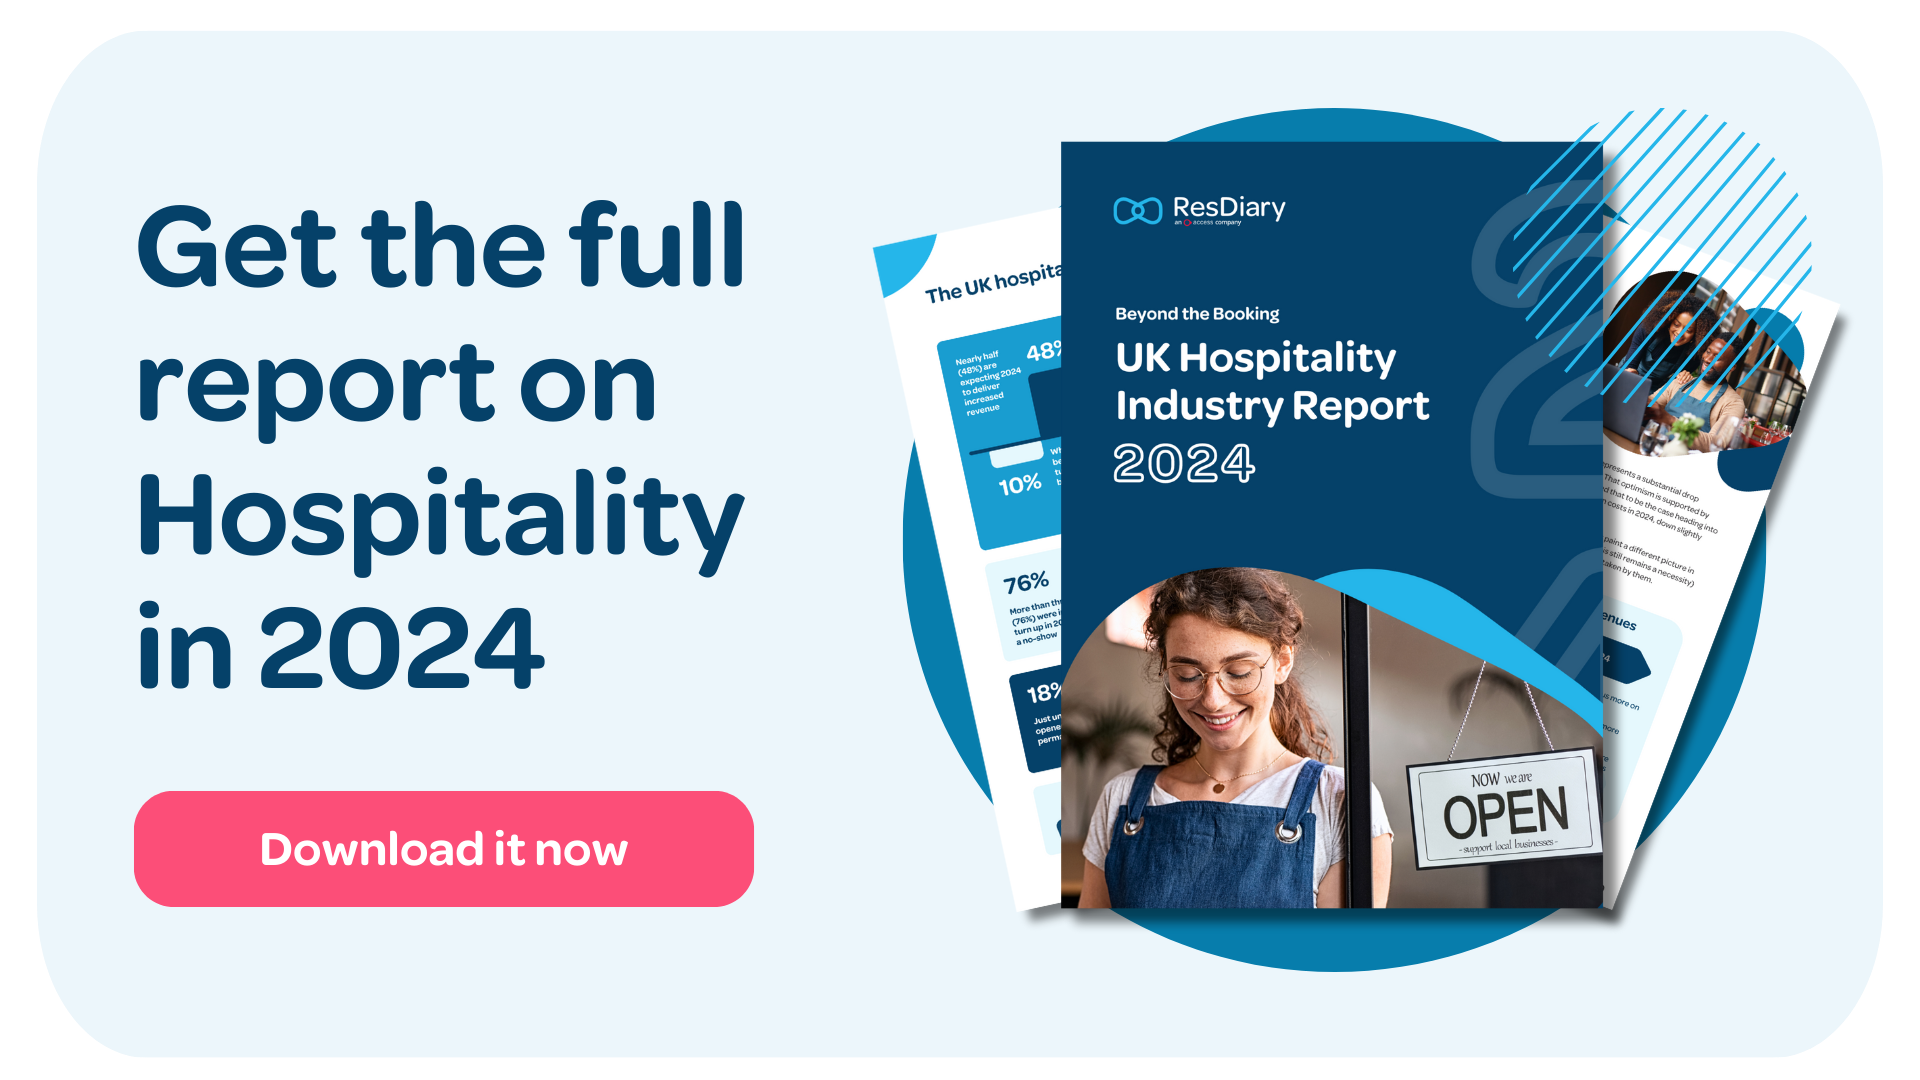 Download the full hospitality industry report for 2024